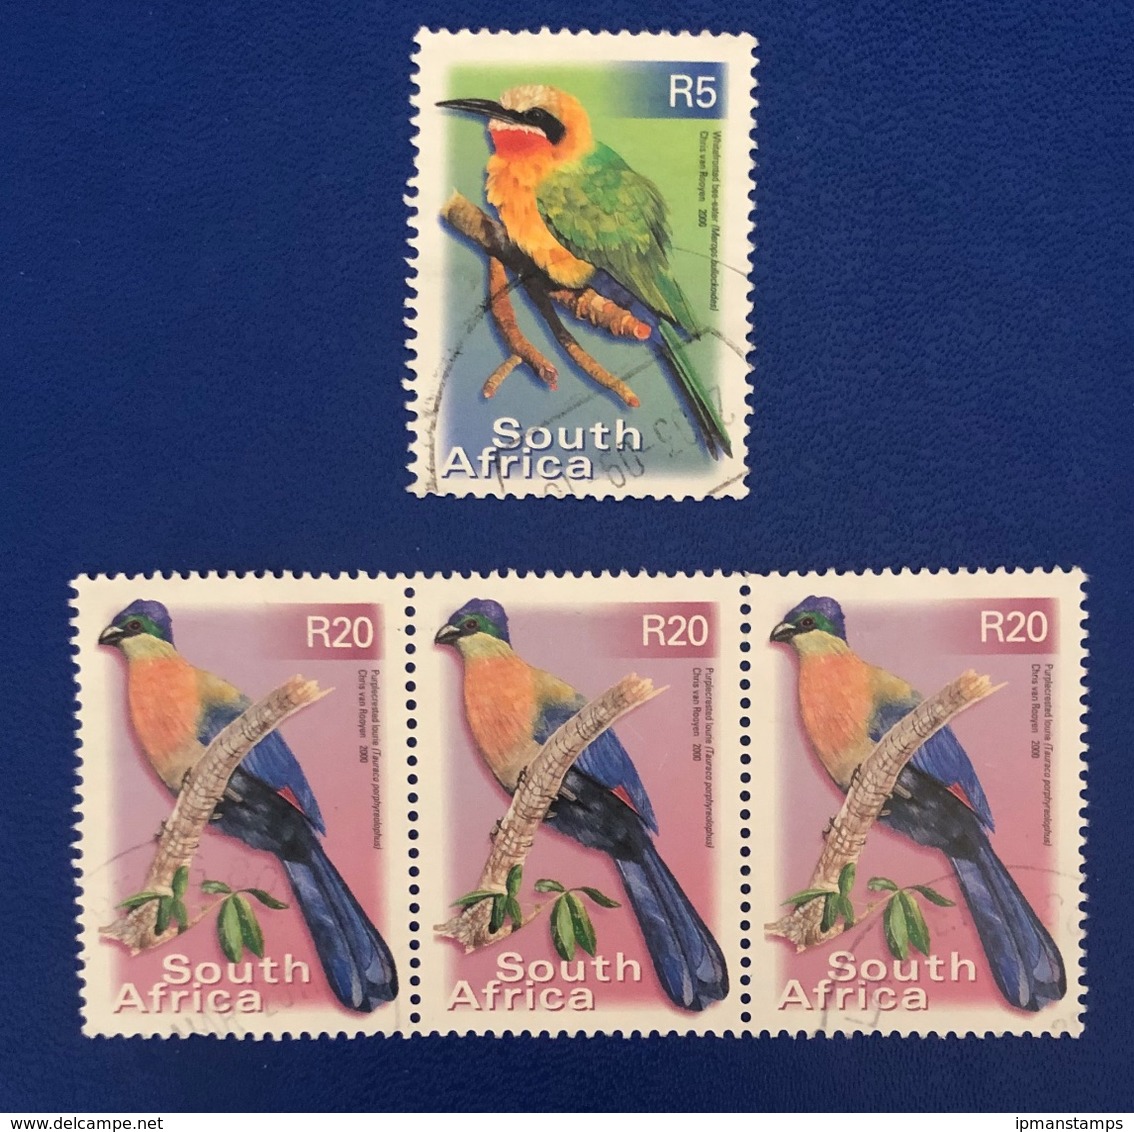 UCCELLI / BIRDS - ANNO/YEAR 2000 - Used Stamps